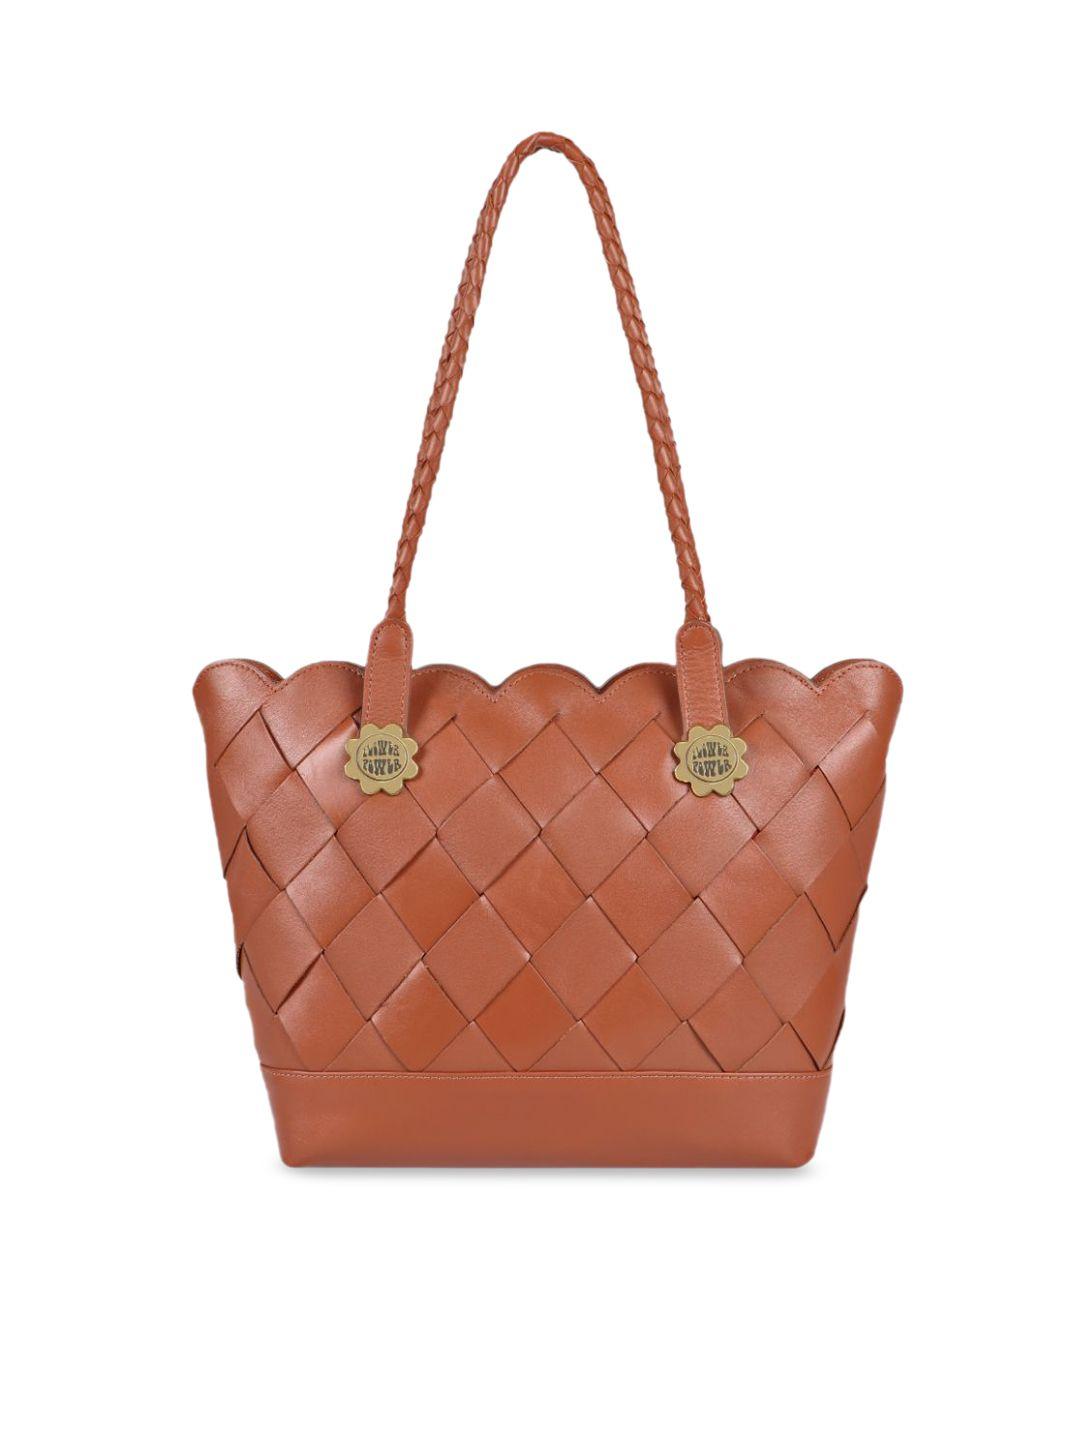 hidesign tan geometric leather swagger shoulder bag with quilted